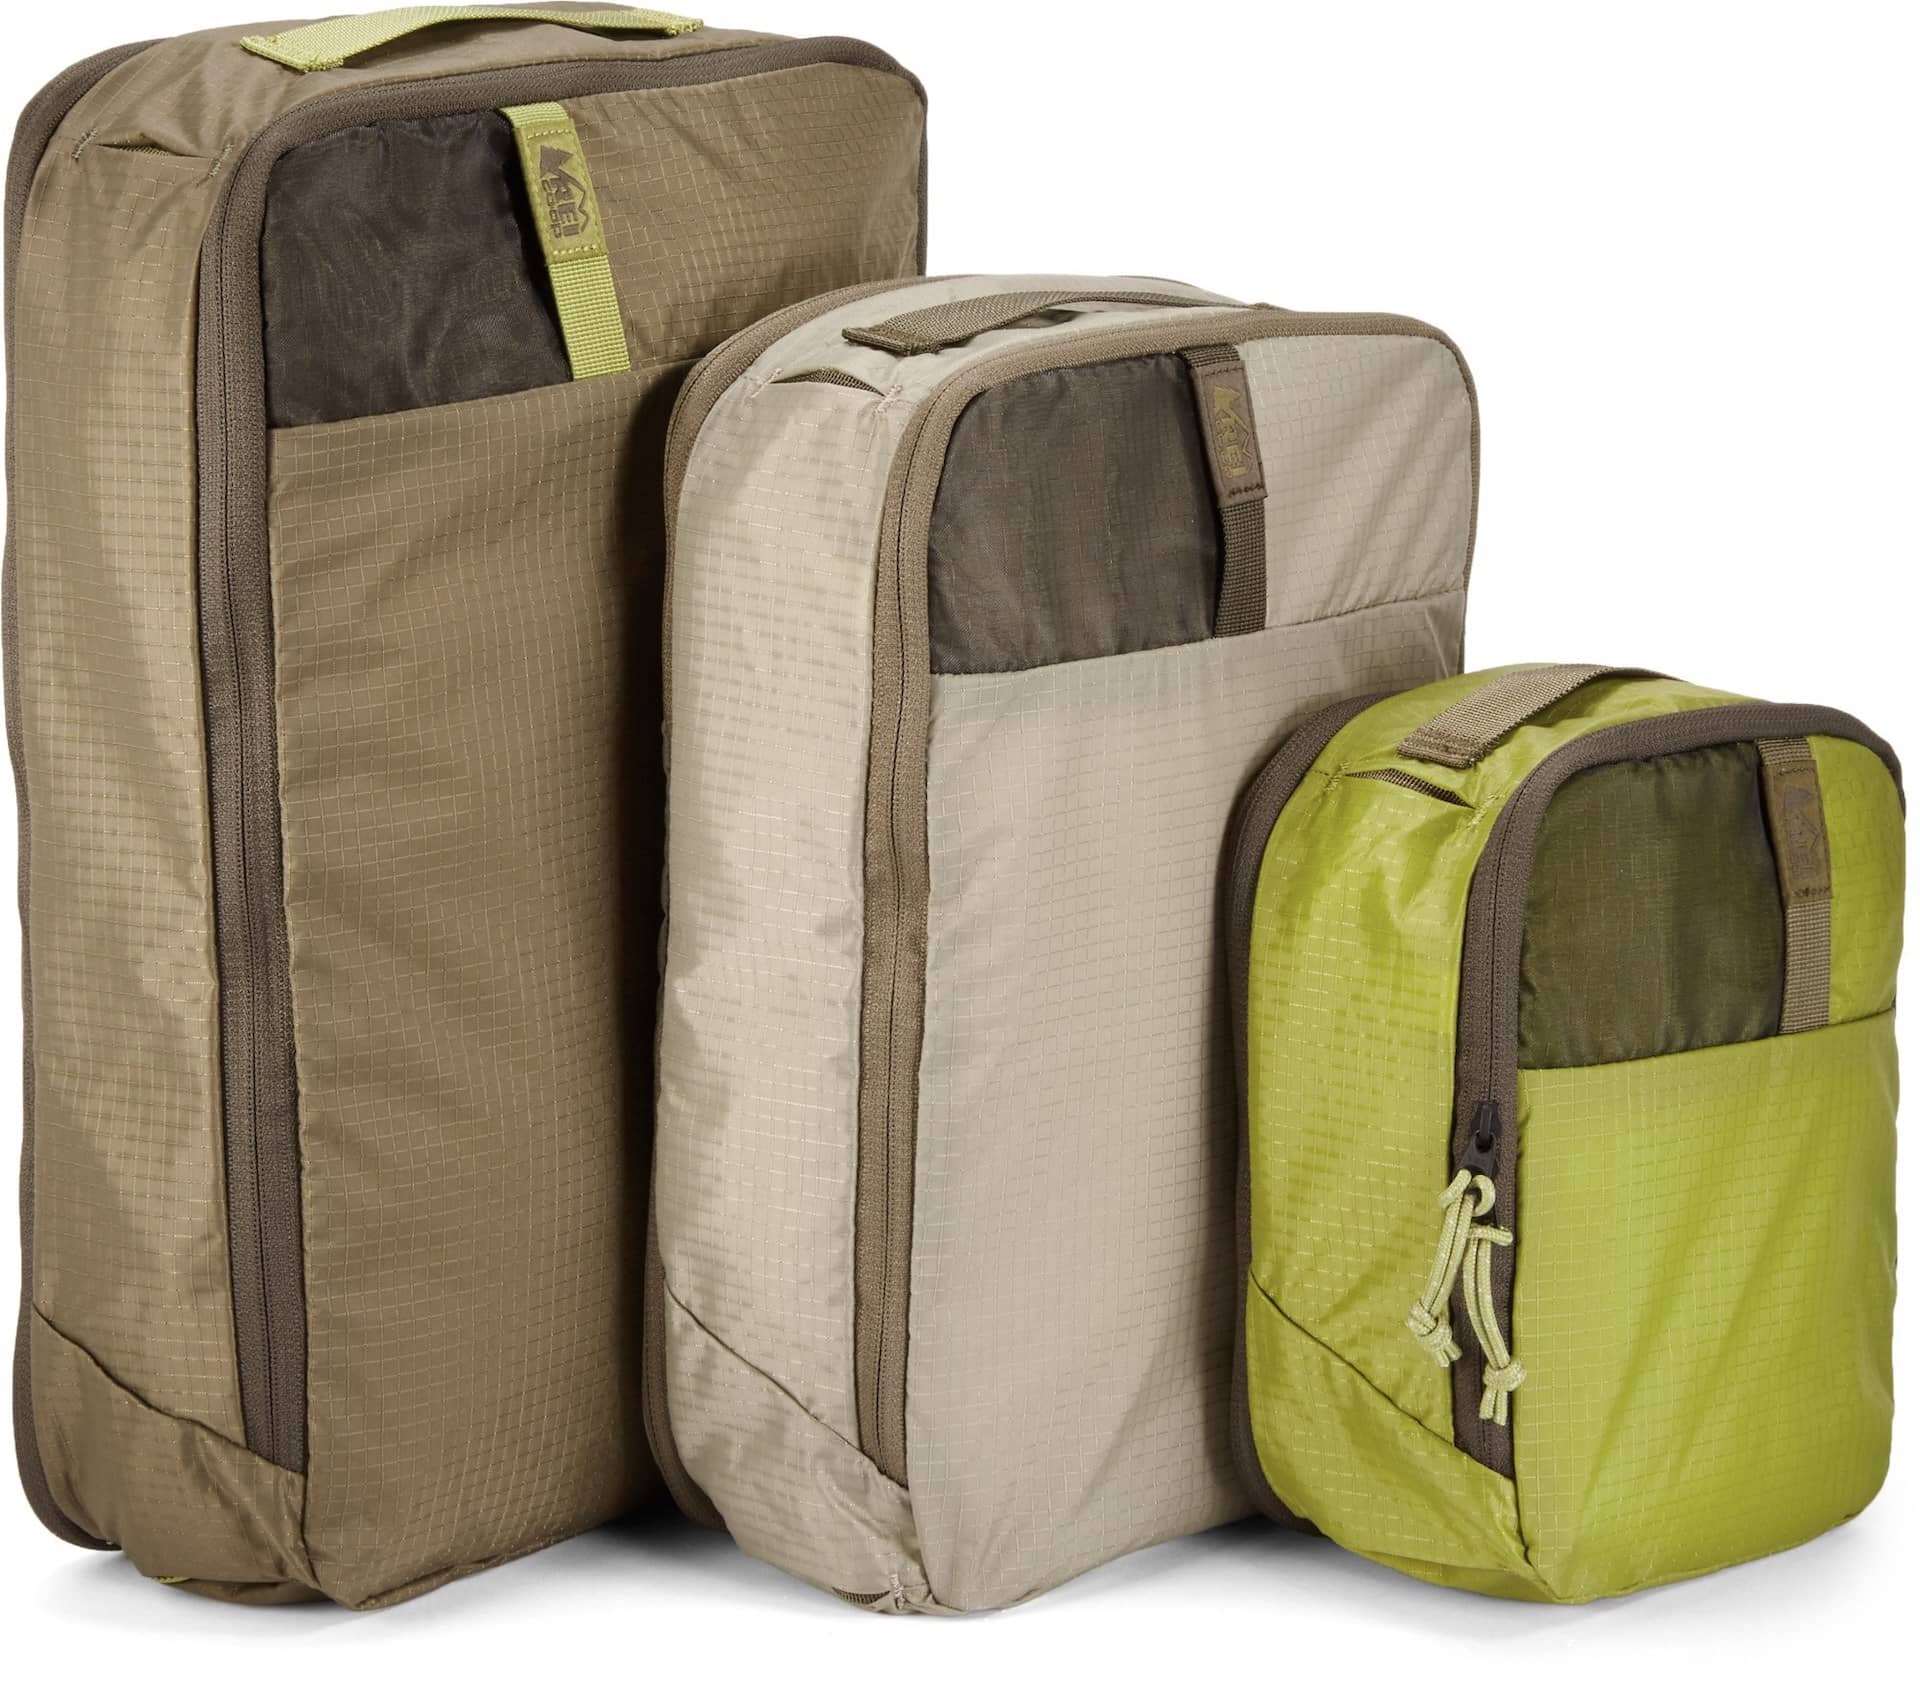 Best Packing Cubes for Travel - REI